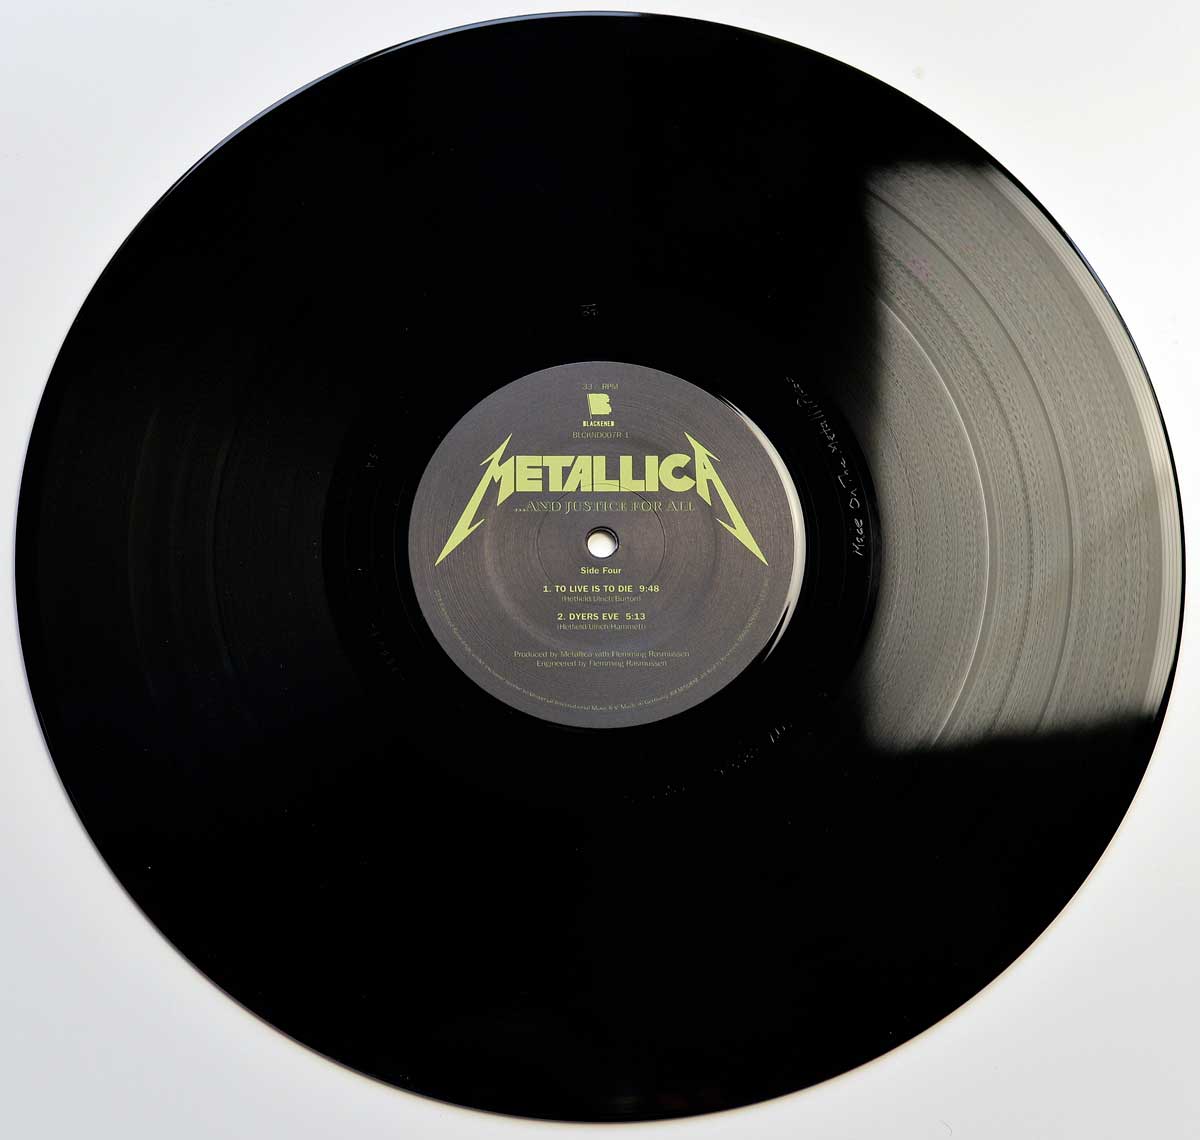 Photo of Side Four: METALLICA - And Justice For All Blackened Records 180Gr Vinyl 